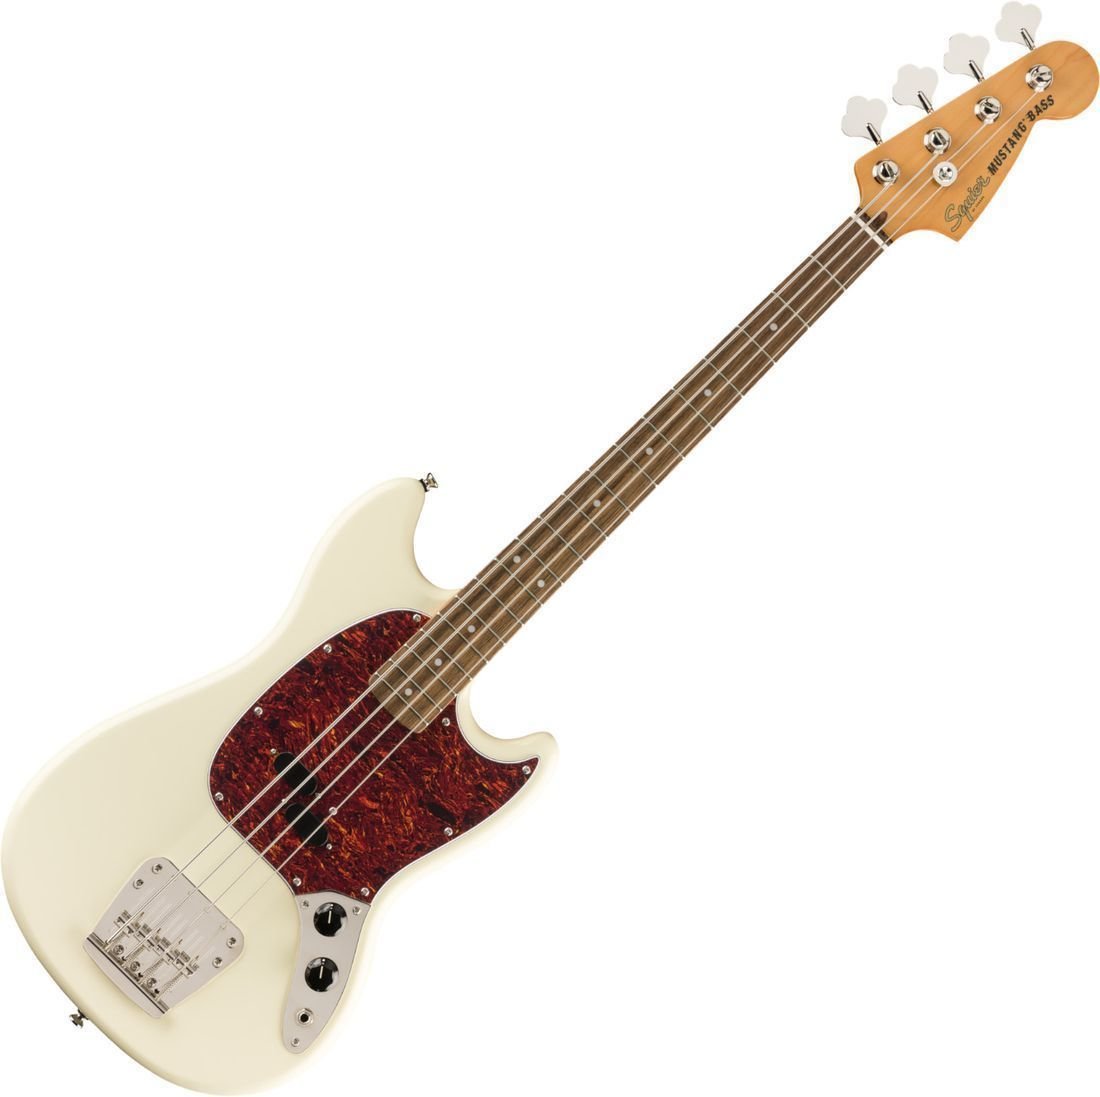 E-Bass Fender Squier Classic Vibe 60s Mustang Bass LRL Olympic White